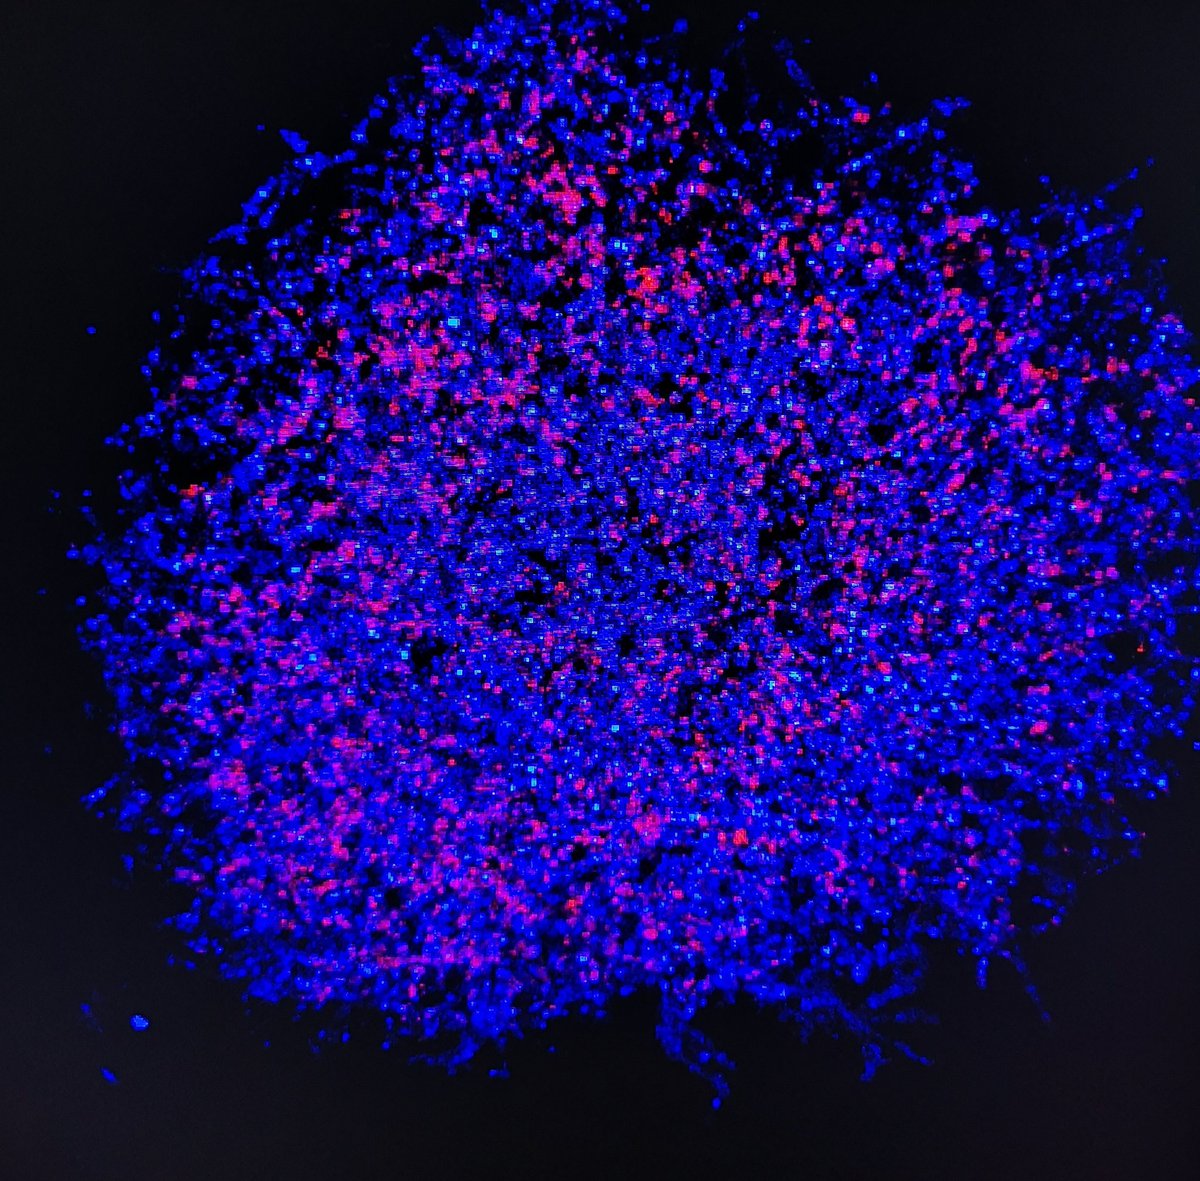 Day 90 Retinal #organoids stained for apoptosis marker (caspase 3 shown in red)
#FluorescenceFriday #visionresearch #stemcells #sciart